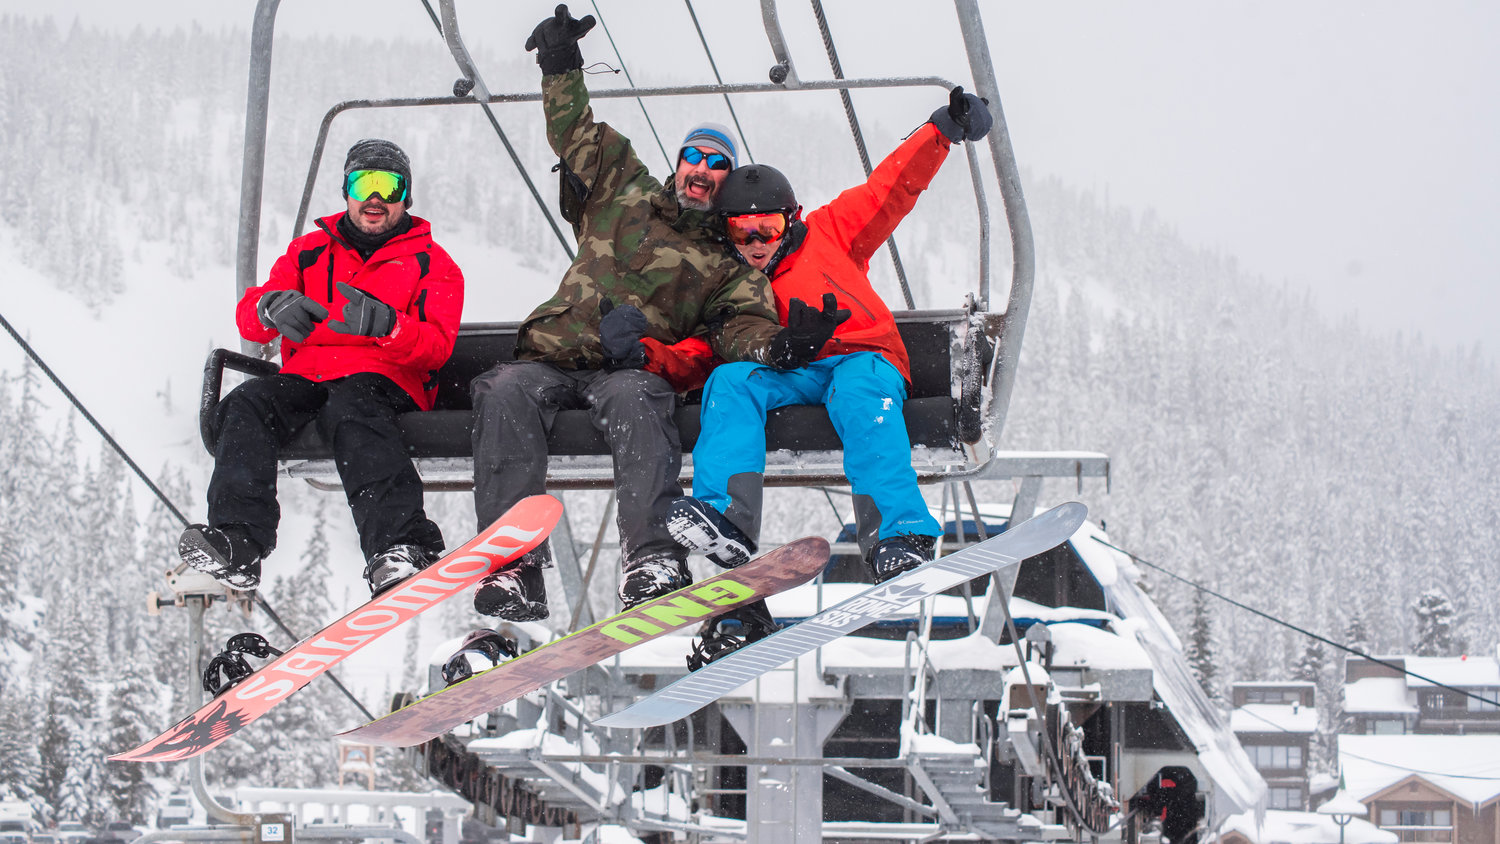 Snowboarders pose for a photo on opening day at White Pass while riding a lift.